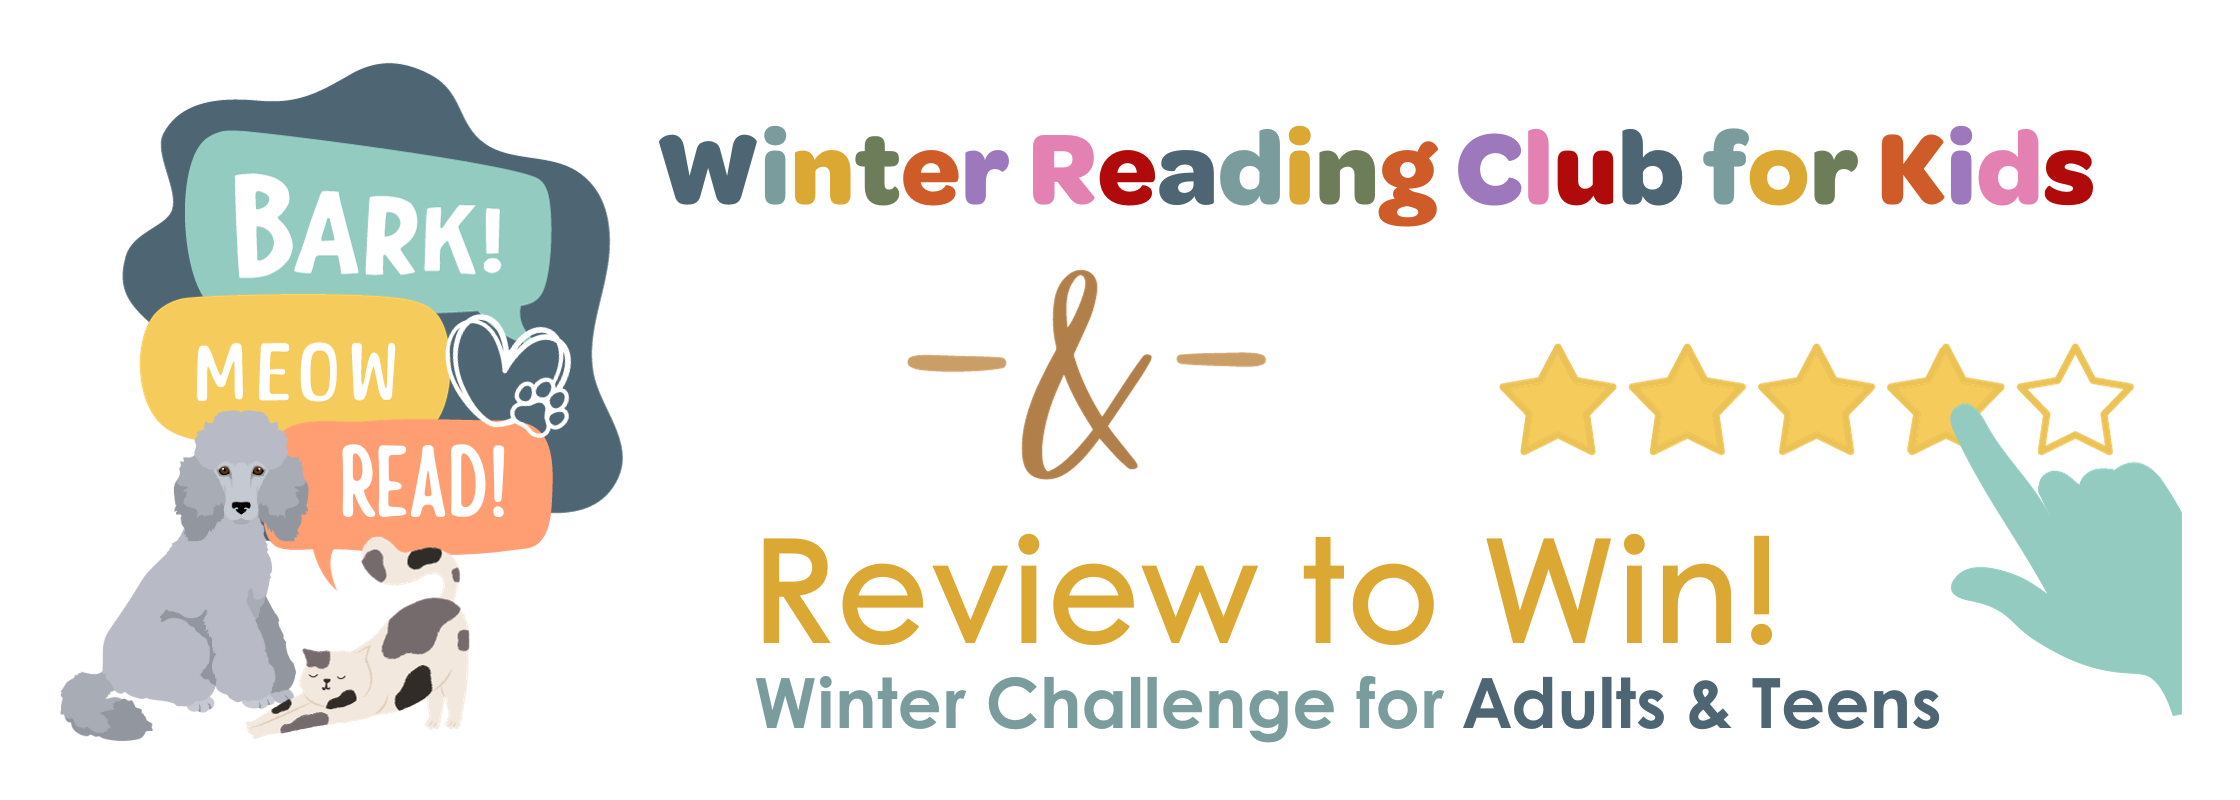 Winter Reading Club for Kids, and Review to Win for Teens and Adults